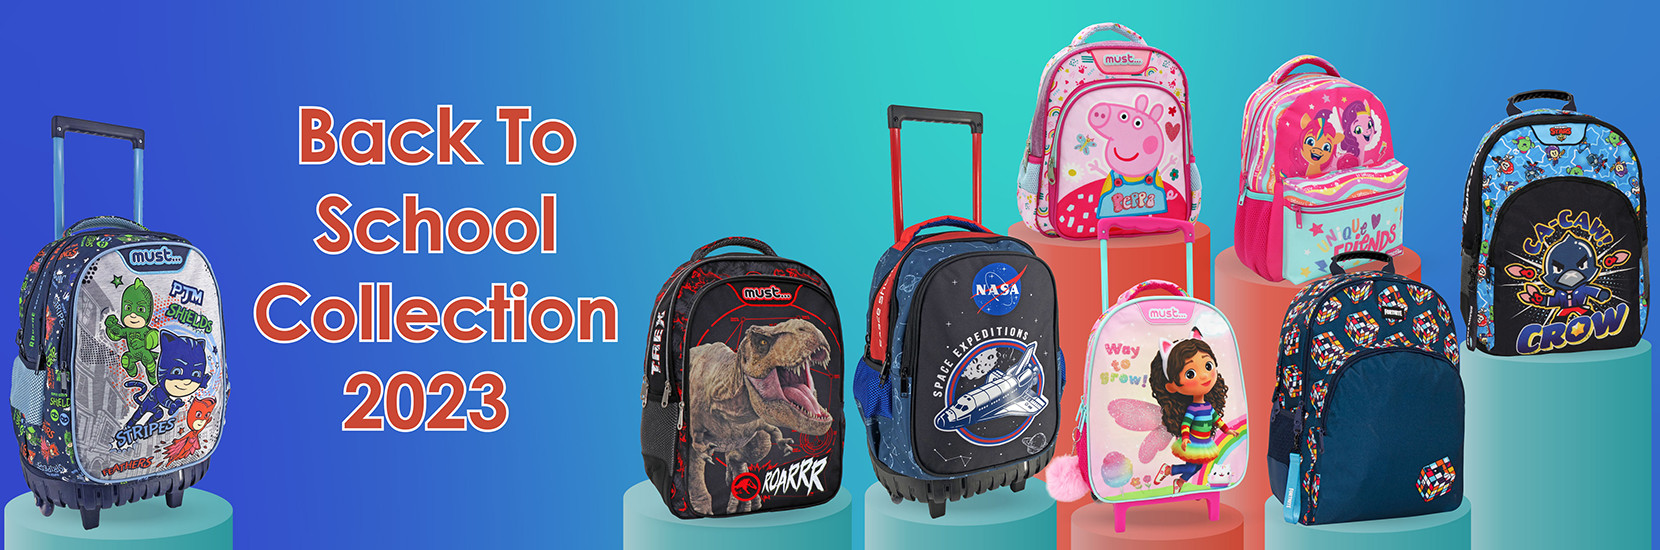 Back To School Collection 2023